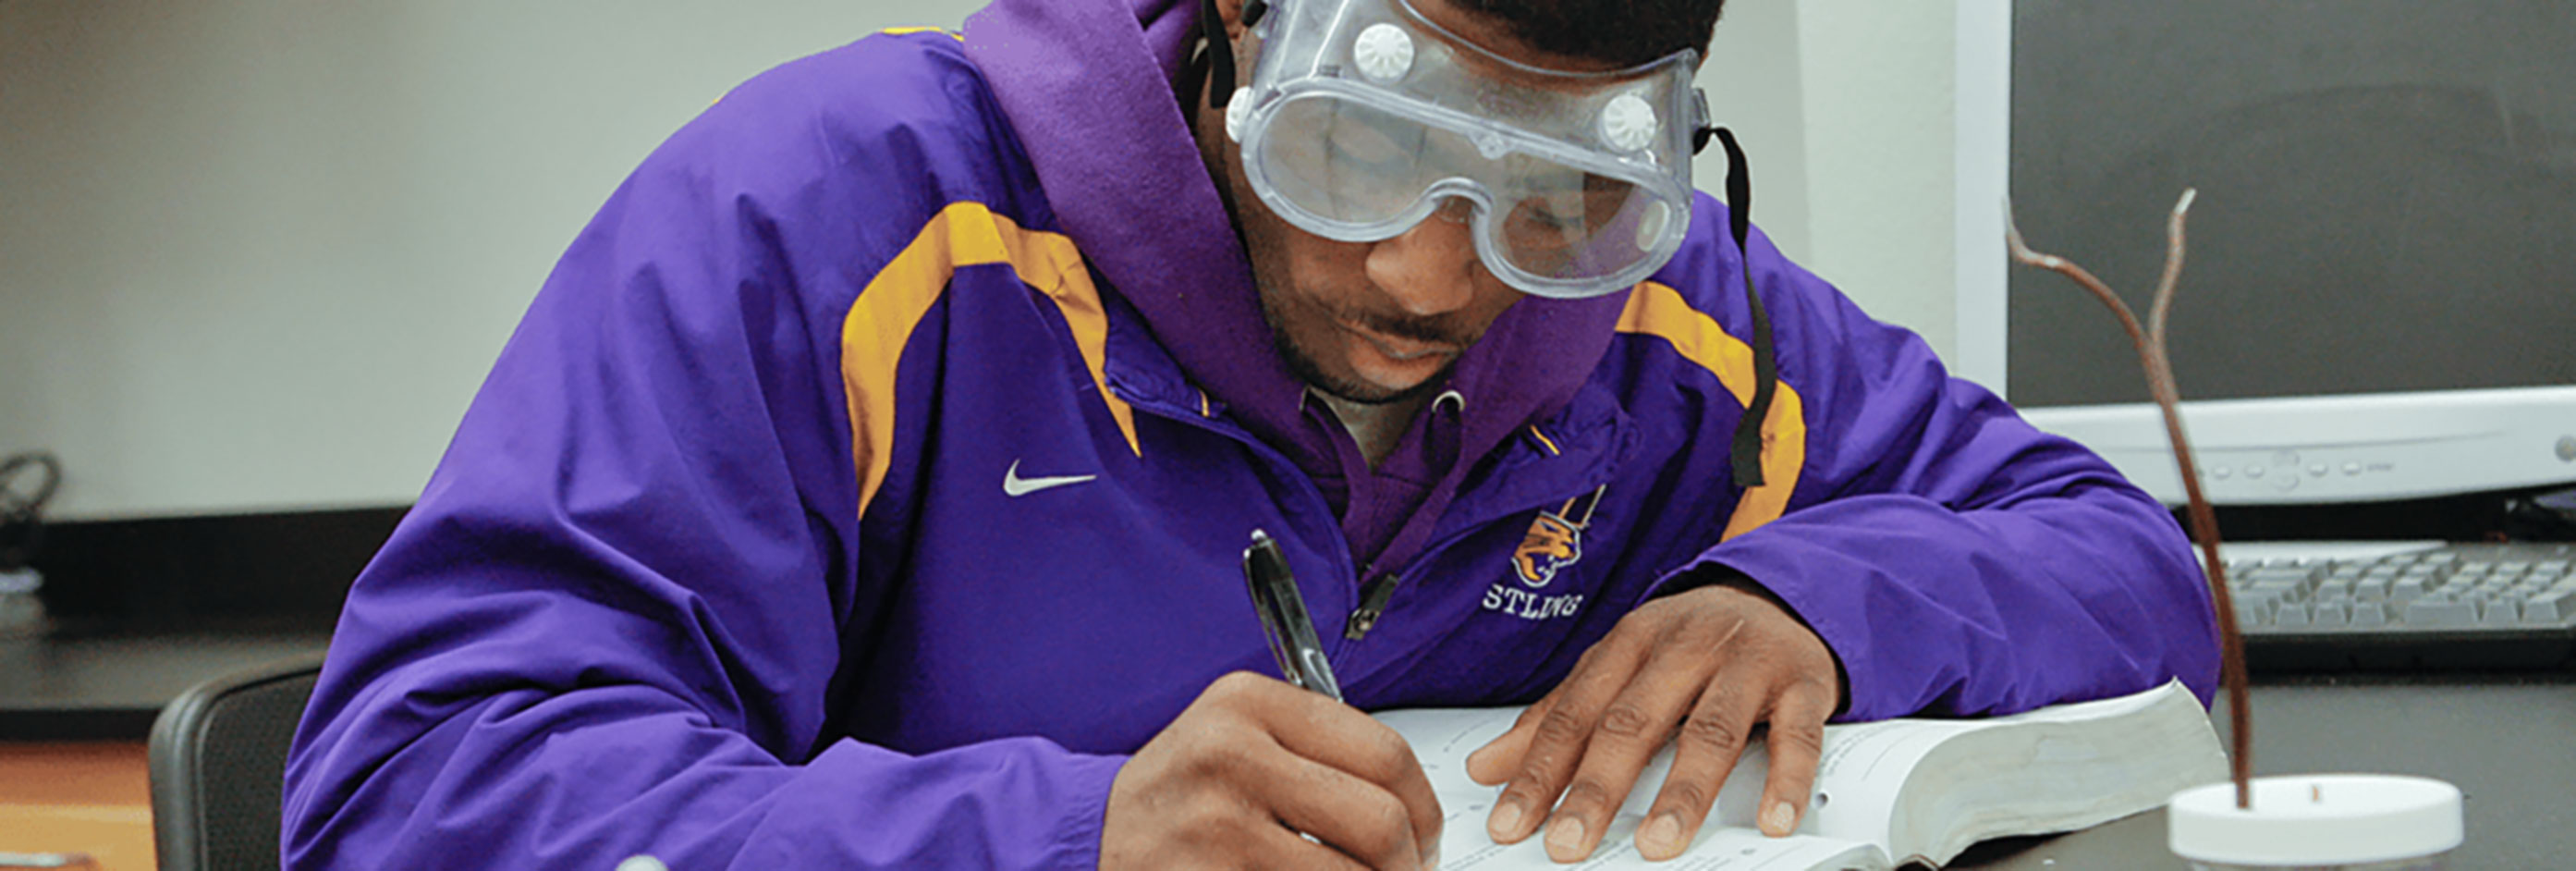 Student with goggles on writing notes.